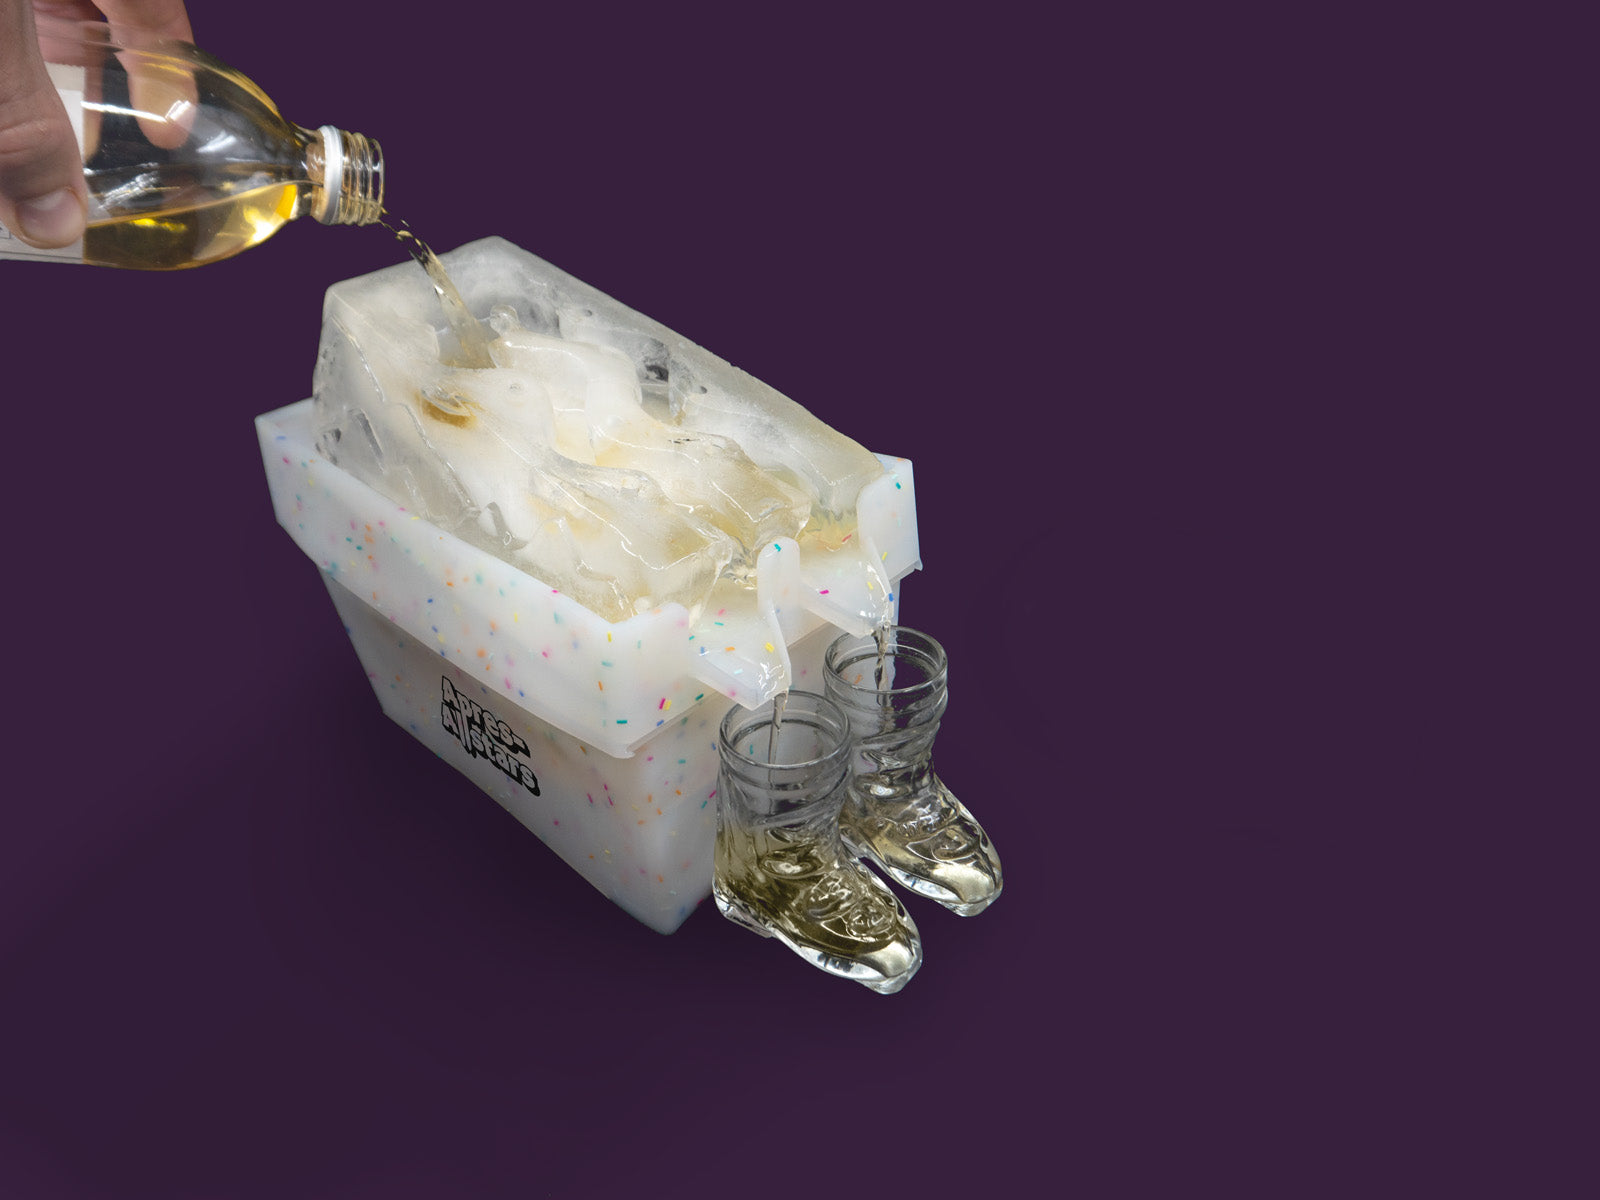 Photo of a white speckled plastic mould and miniature white plastic ski boot bindings, with a block of ice on top that has been molded in the shape of a slalom slope, with 2 funnels within the ice through which yellow liquor is poured to chill it. The yellow liquor runs through the ice and into waiting shots glasses shaped like ski boots. The image is set against a purple backdrop, viewed from the right hand side.